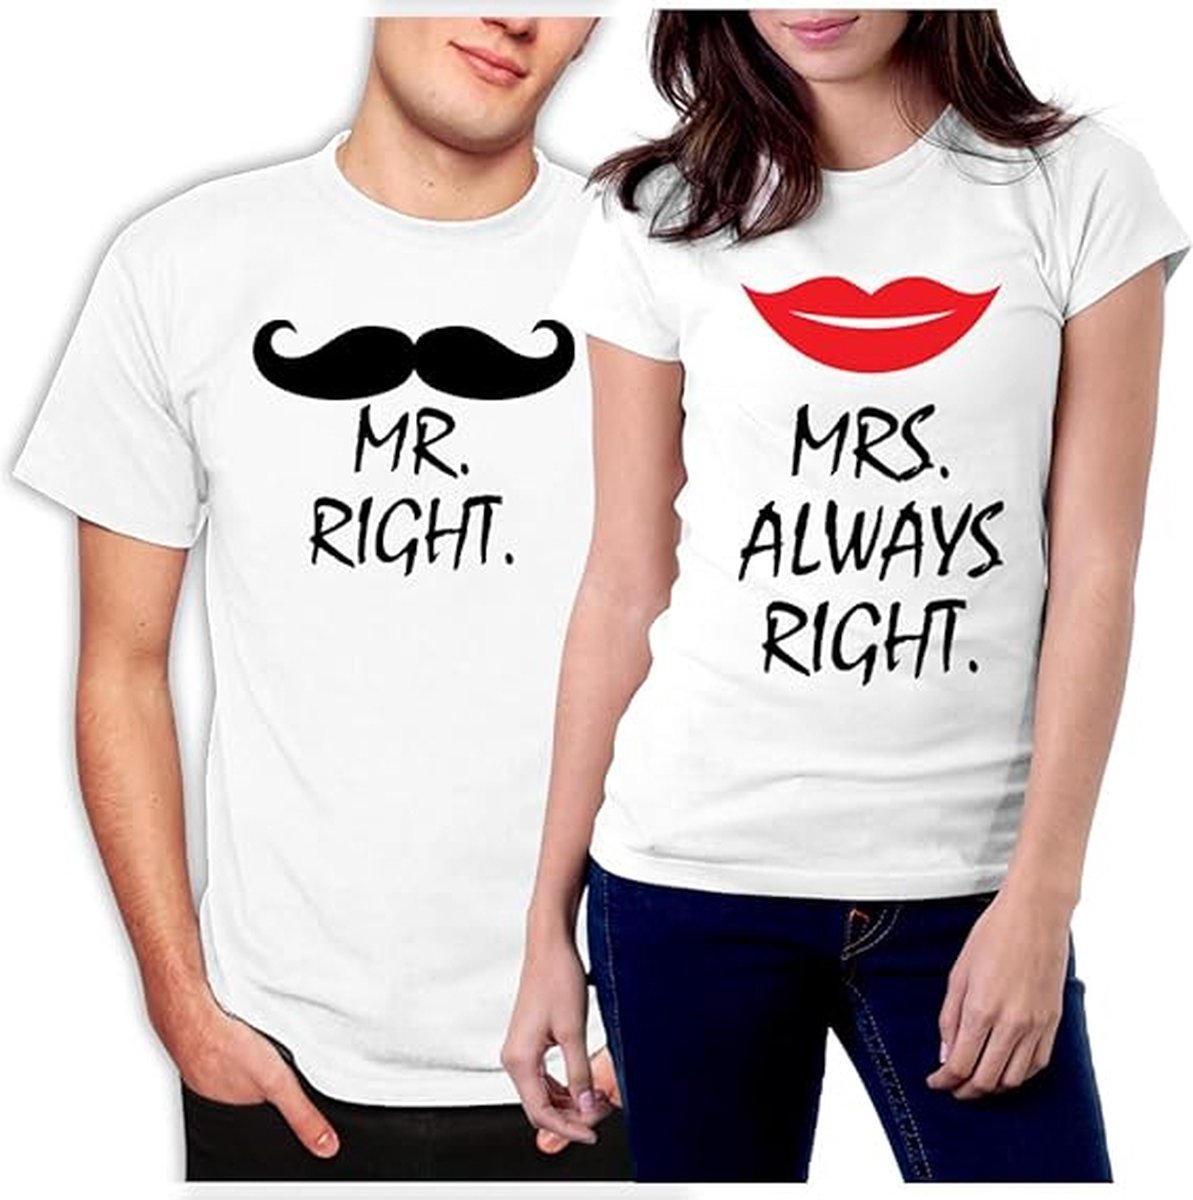 PicOnTshirt - Teetalks Series - T-Shirt Dames - T-Shirt Heren - T-Shirt Met Print - Couple T-Shirt Met 'Mr. Right & Mrs. Always Right' Print - 2 Pack - Wit - Heren L/Dames S